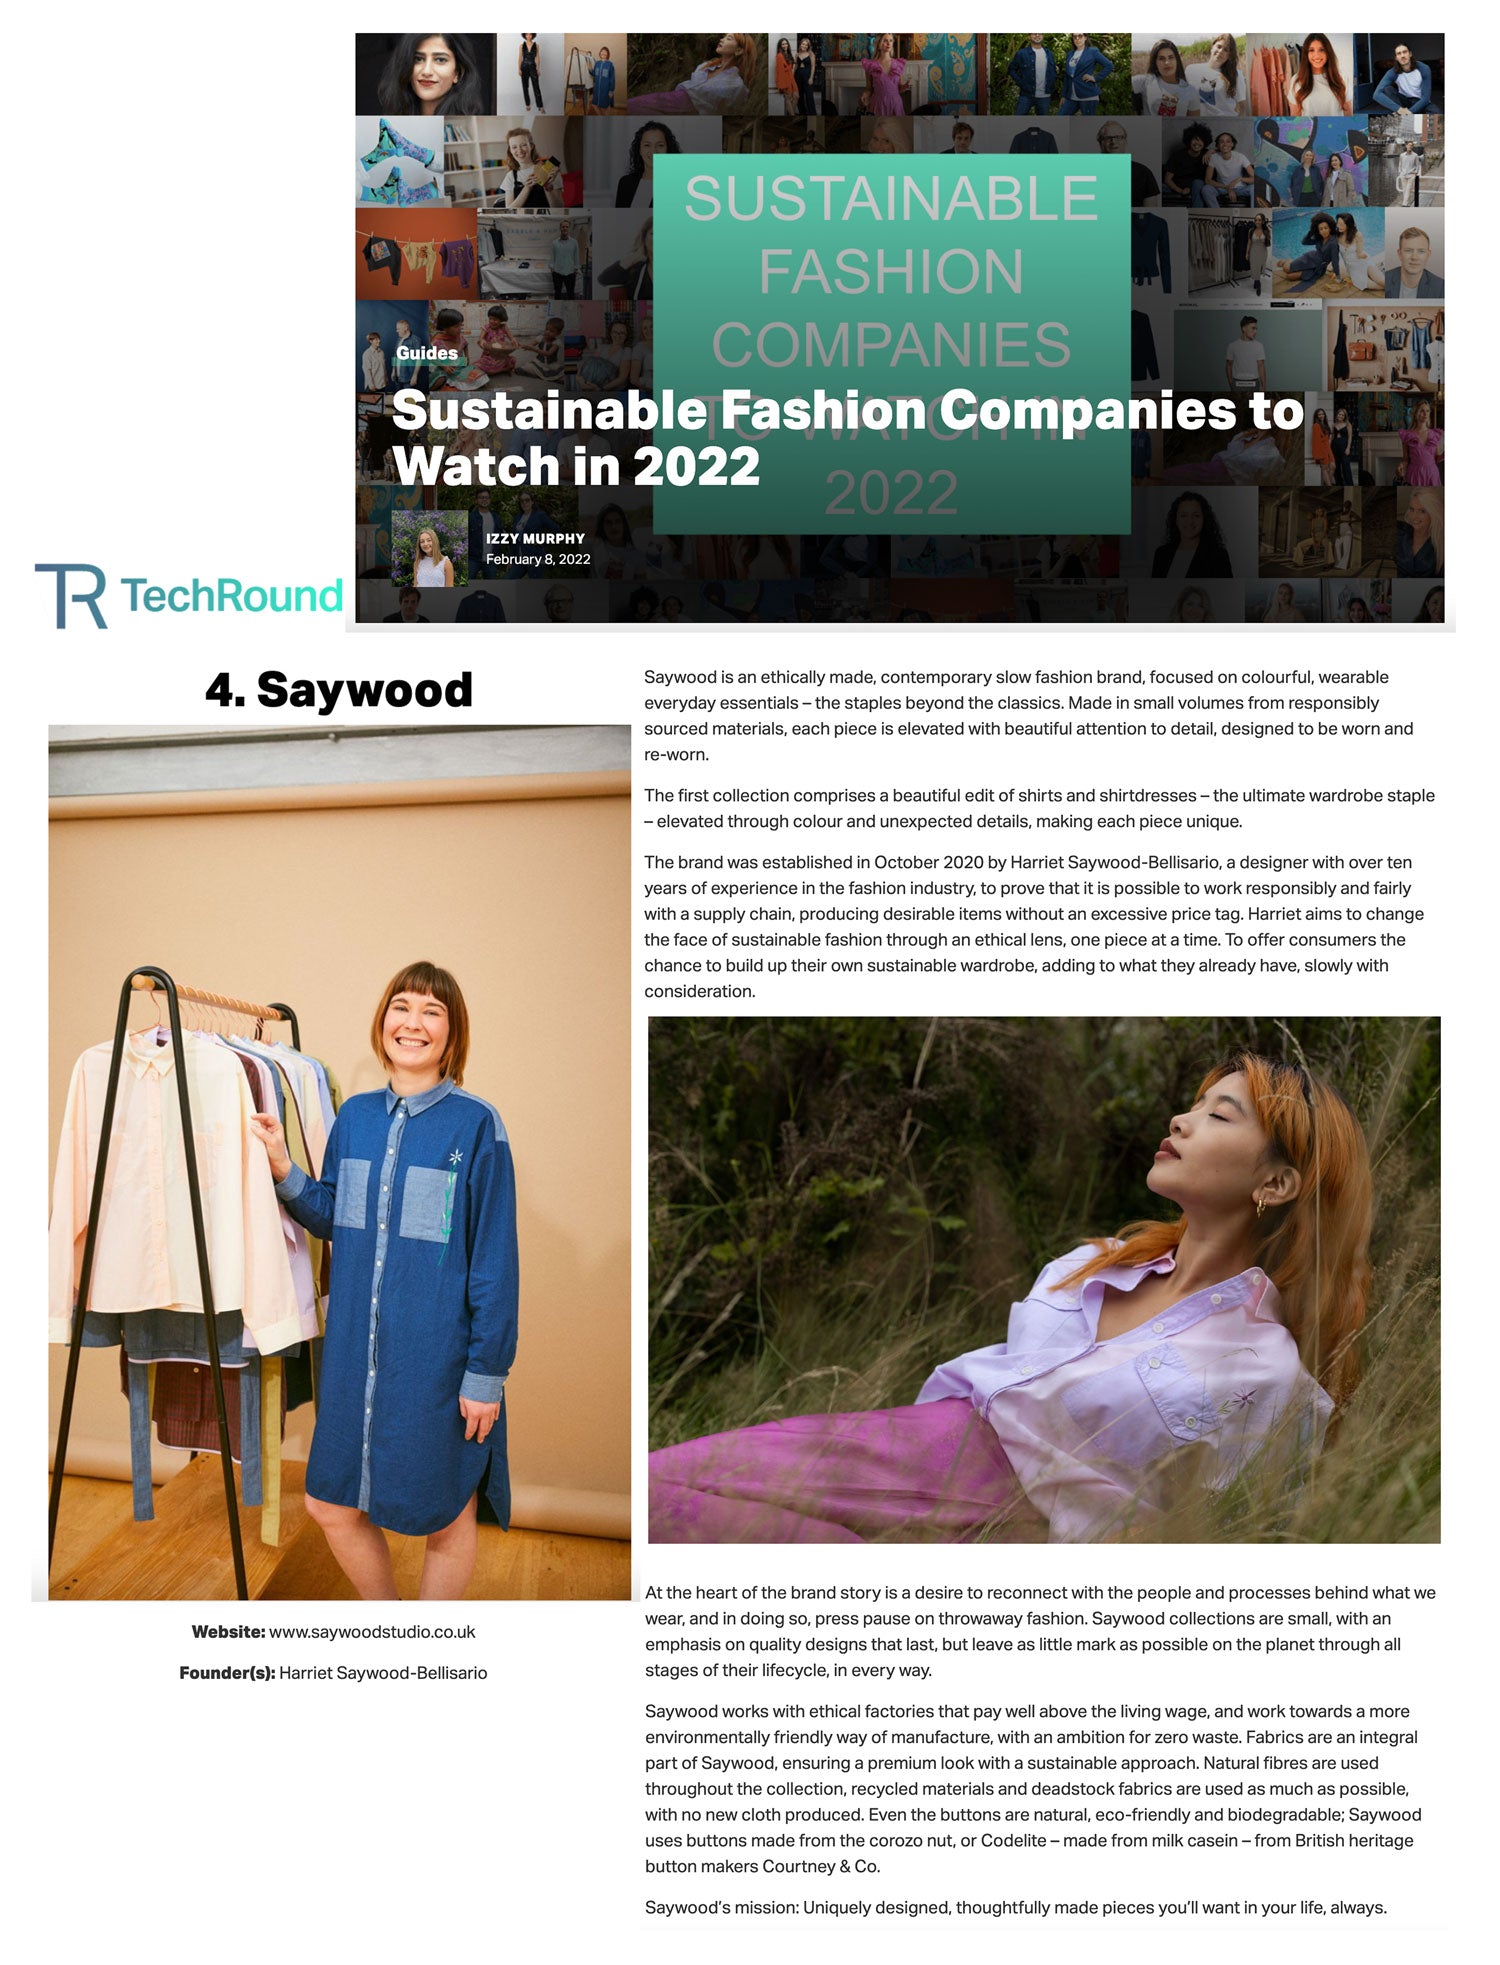 TECHROUND article 'Sustainable Fashion Companies to Watch in 2022' - Saywood